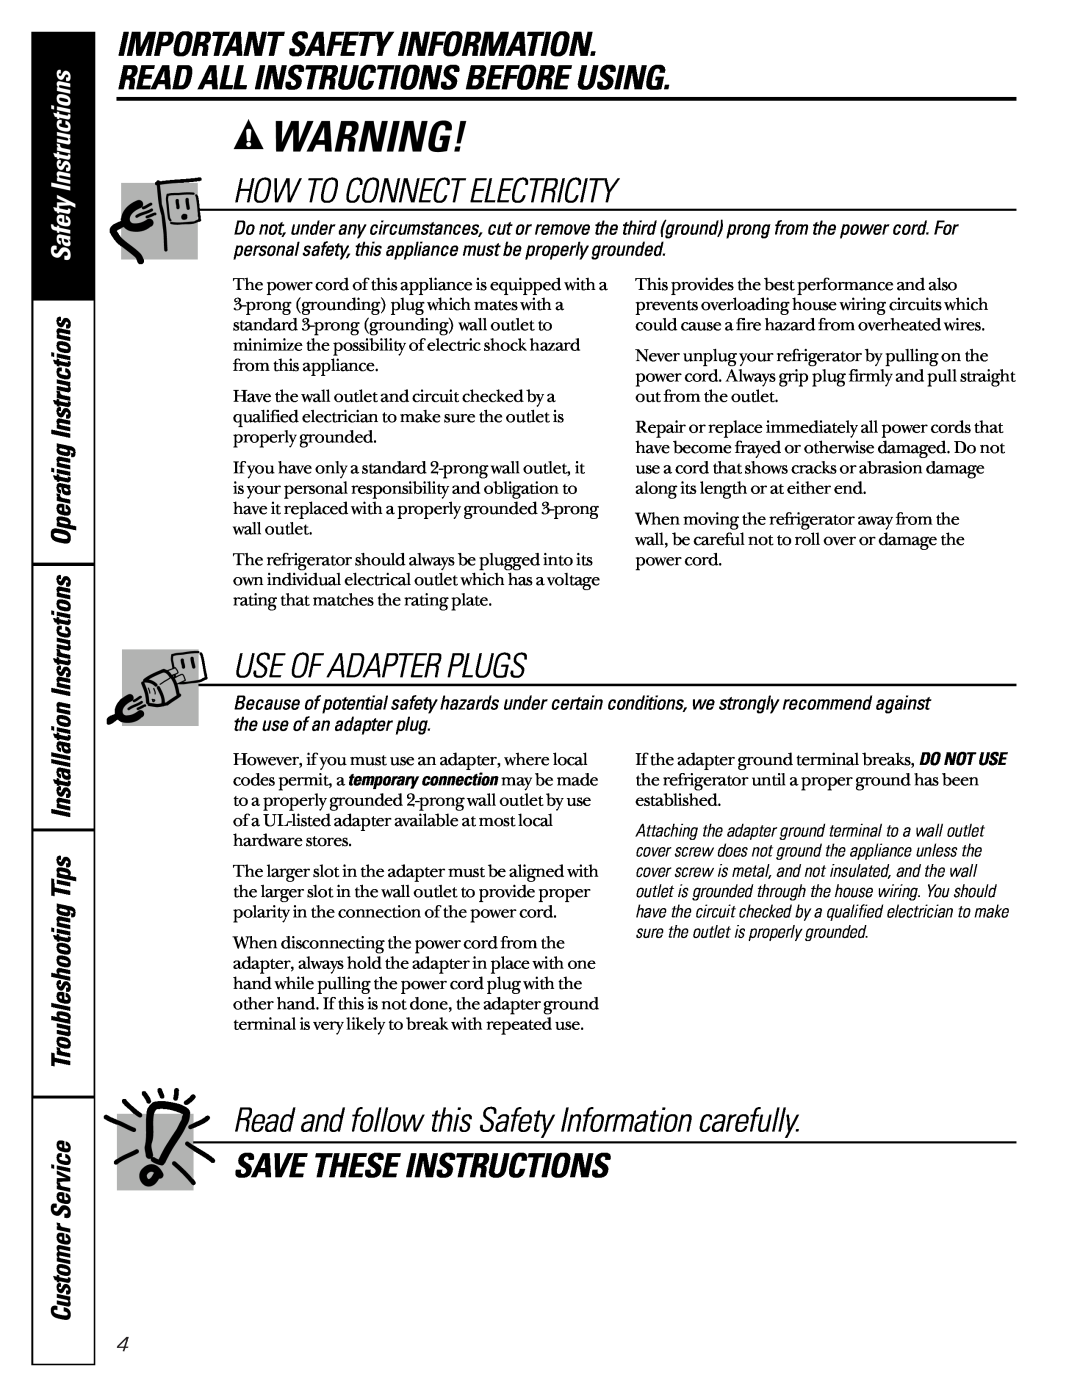 GE TAX2 How To Connect Electricity, Use Of Adapter Plugs, Save These Instructions, OperatingInstructions, CustomerService 